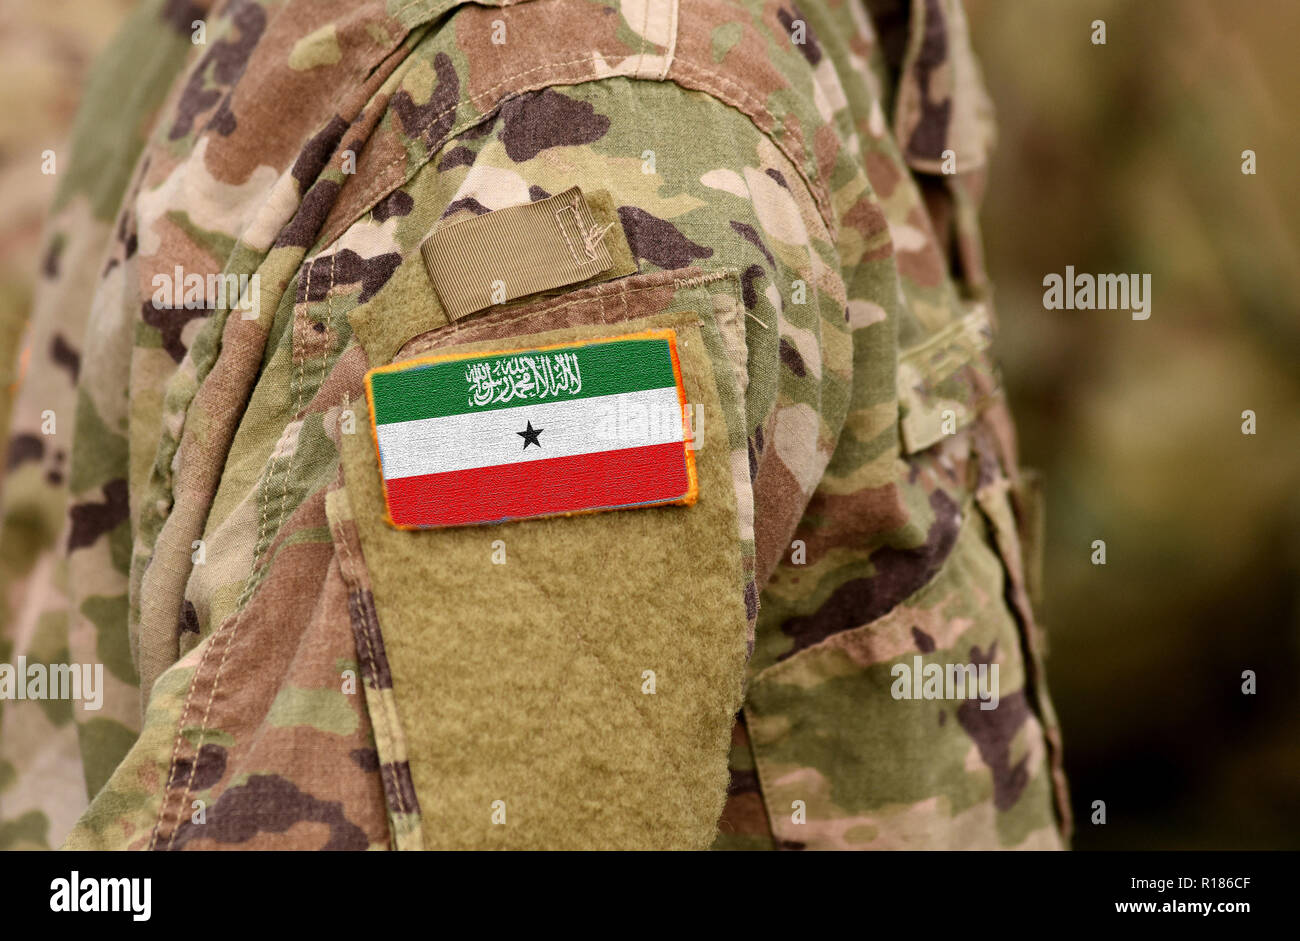 Republic of Somaliland flag on soldiers arm. Somaliland army (collage) Stock Photo